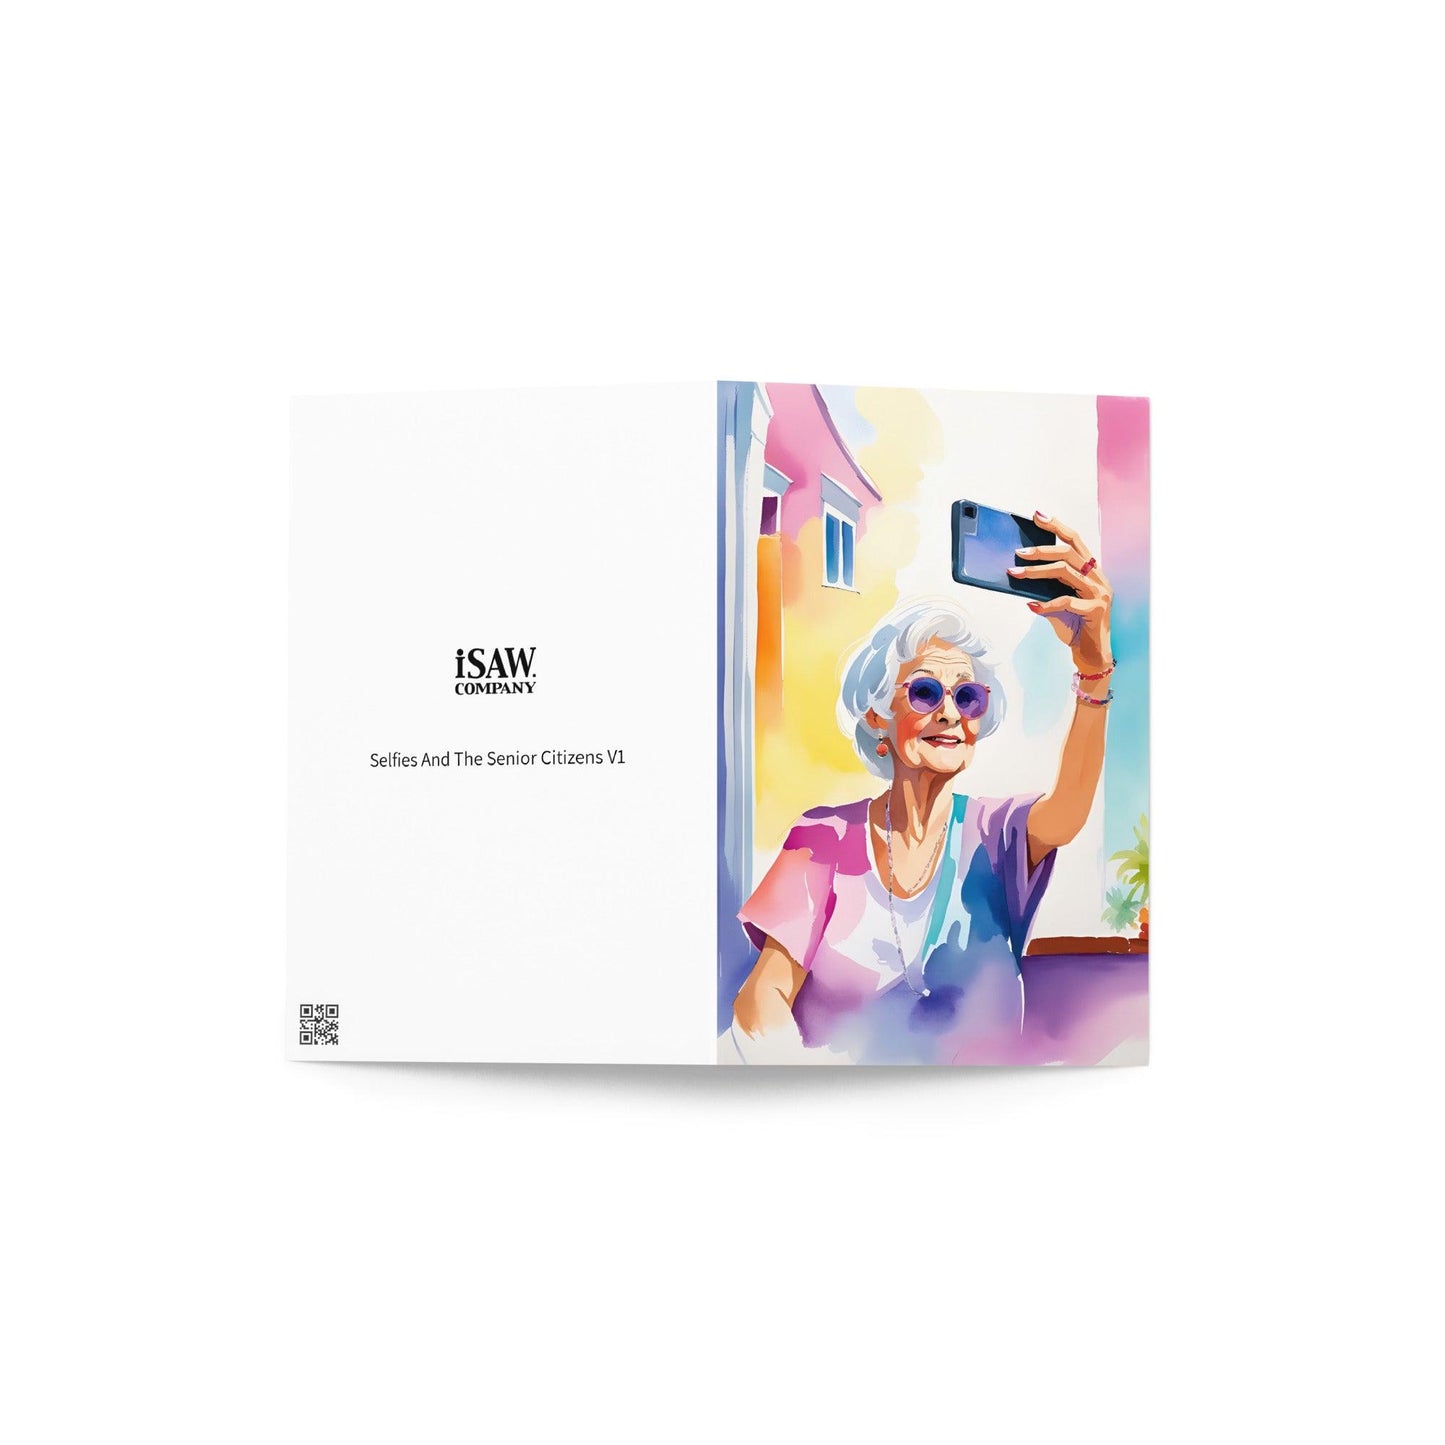 Selfies And The Senior Citizens V1 - Note Card - iSAW Company